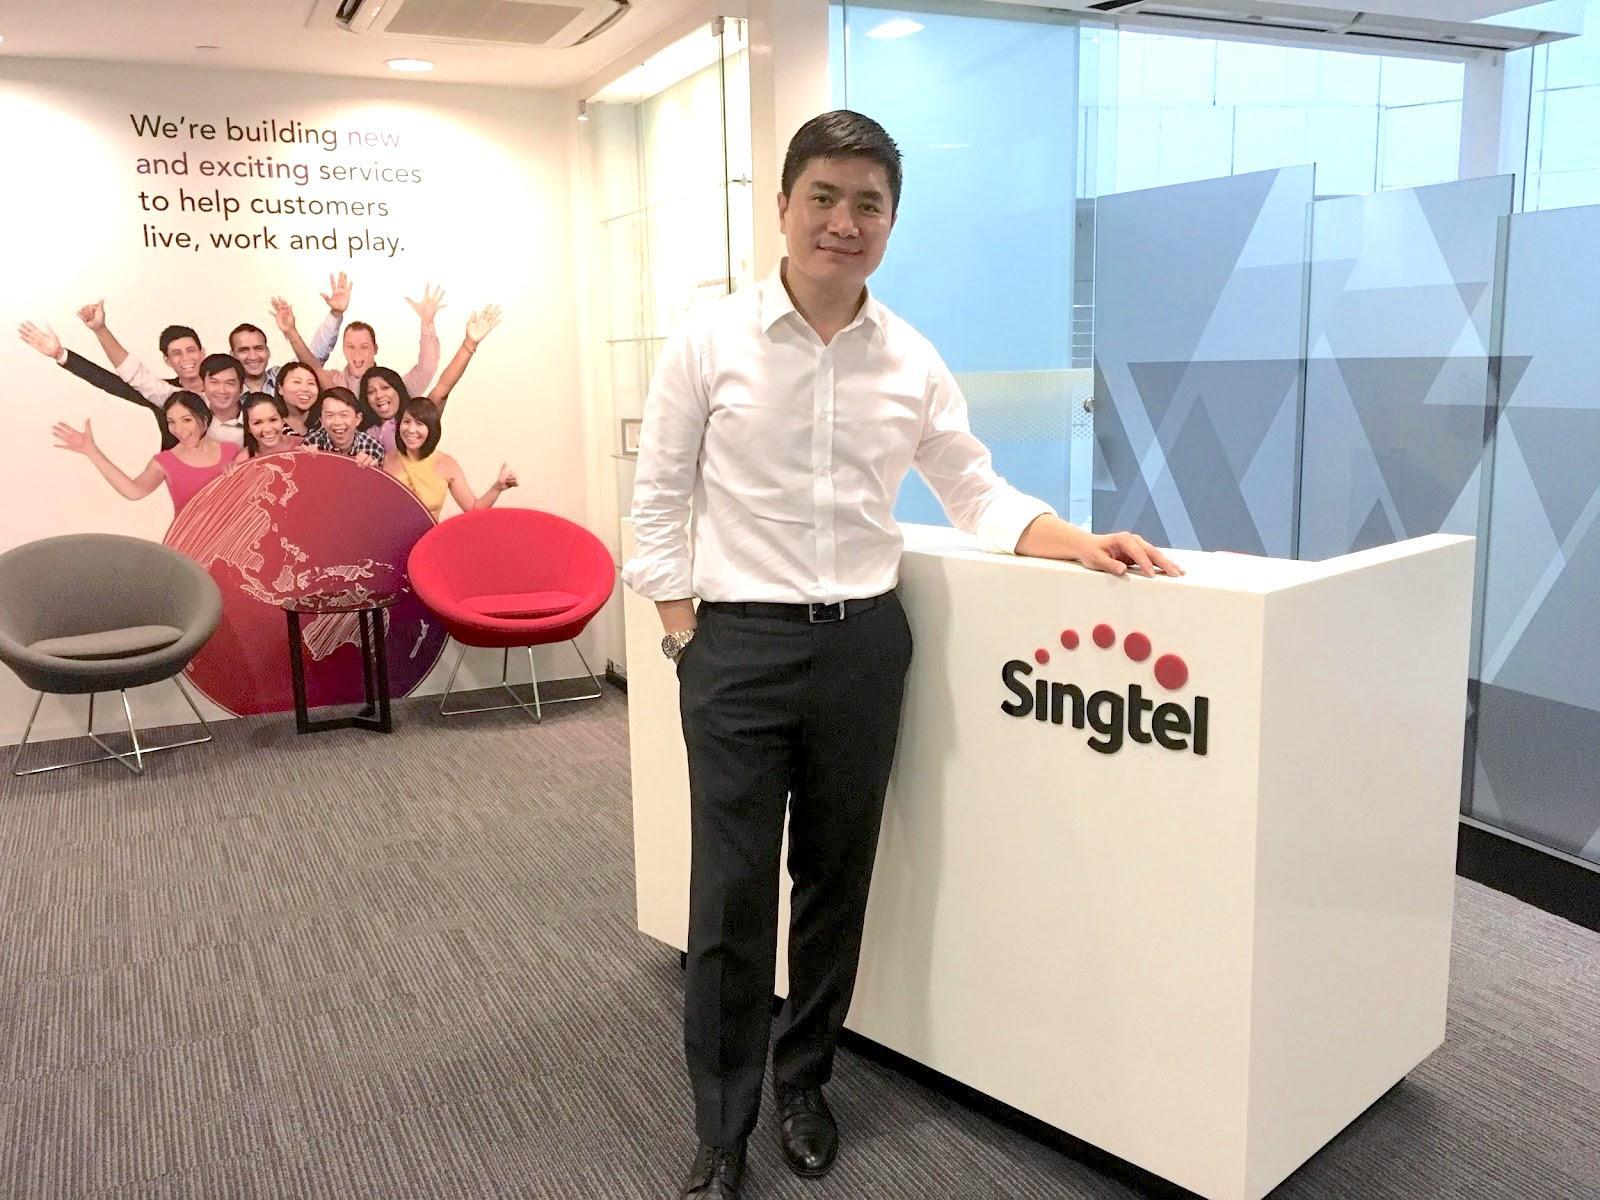 Charlton Ong, vice president of group human resources at Singtel